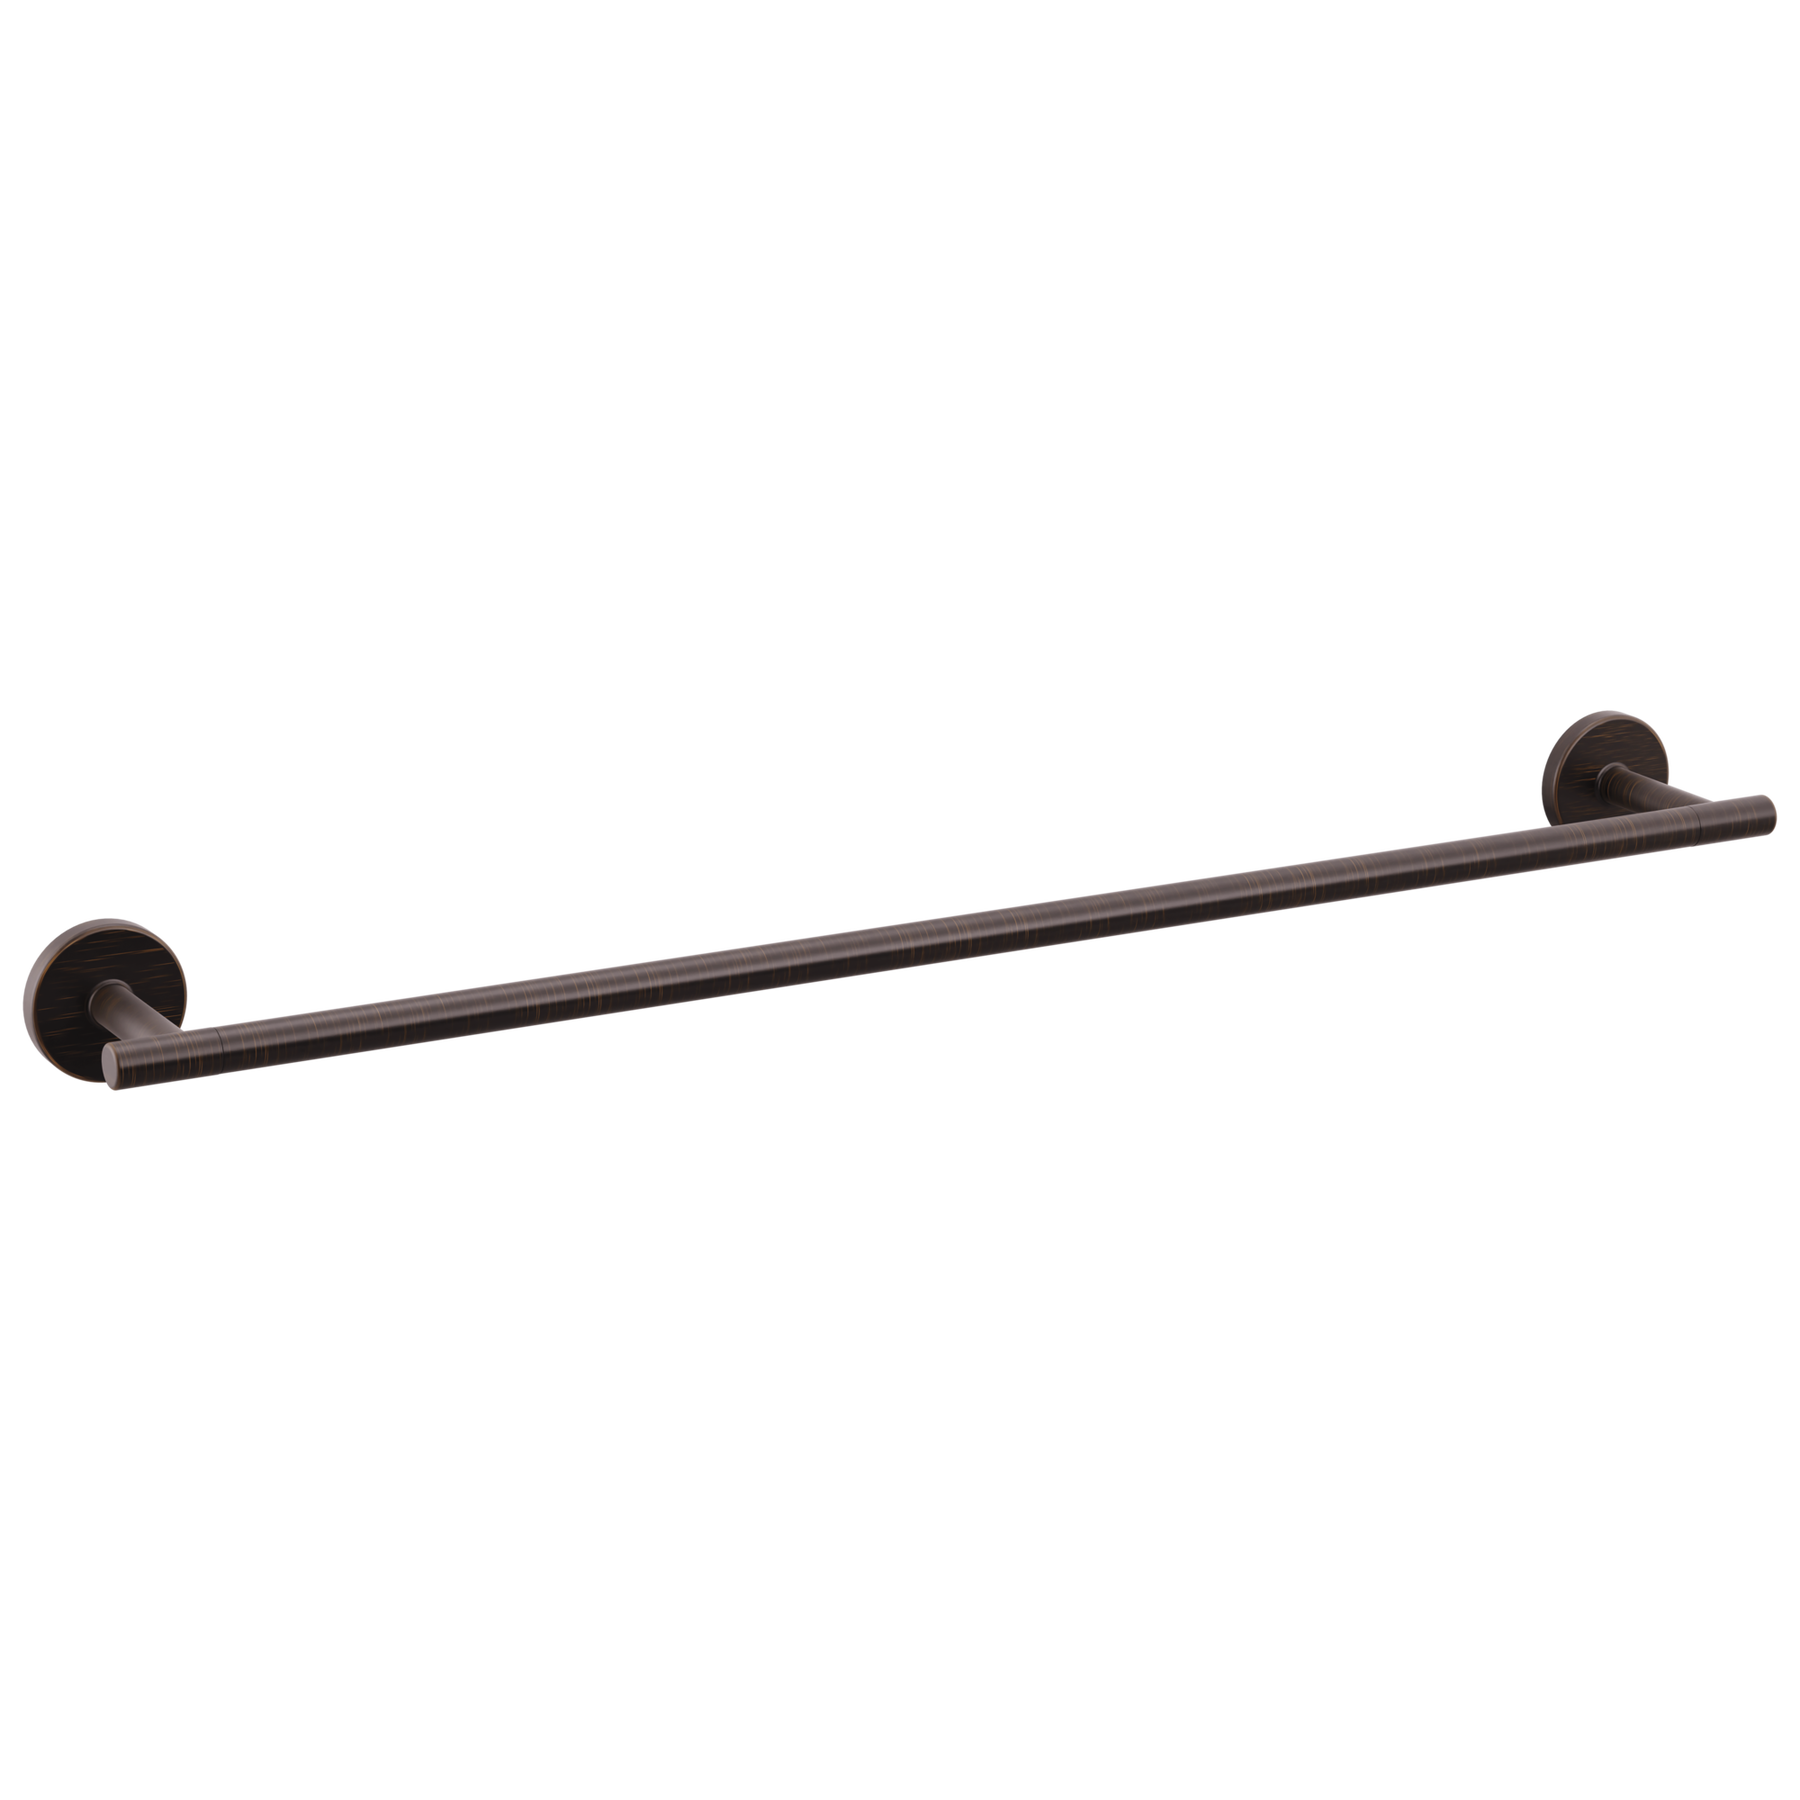 Delta Trinsic 24 in. Towel Bar in Champagne Bronze 759240-CZ - The Home  Depot